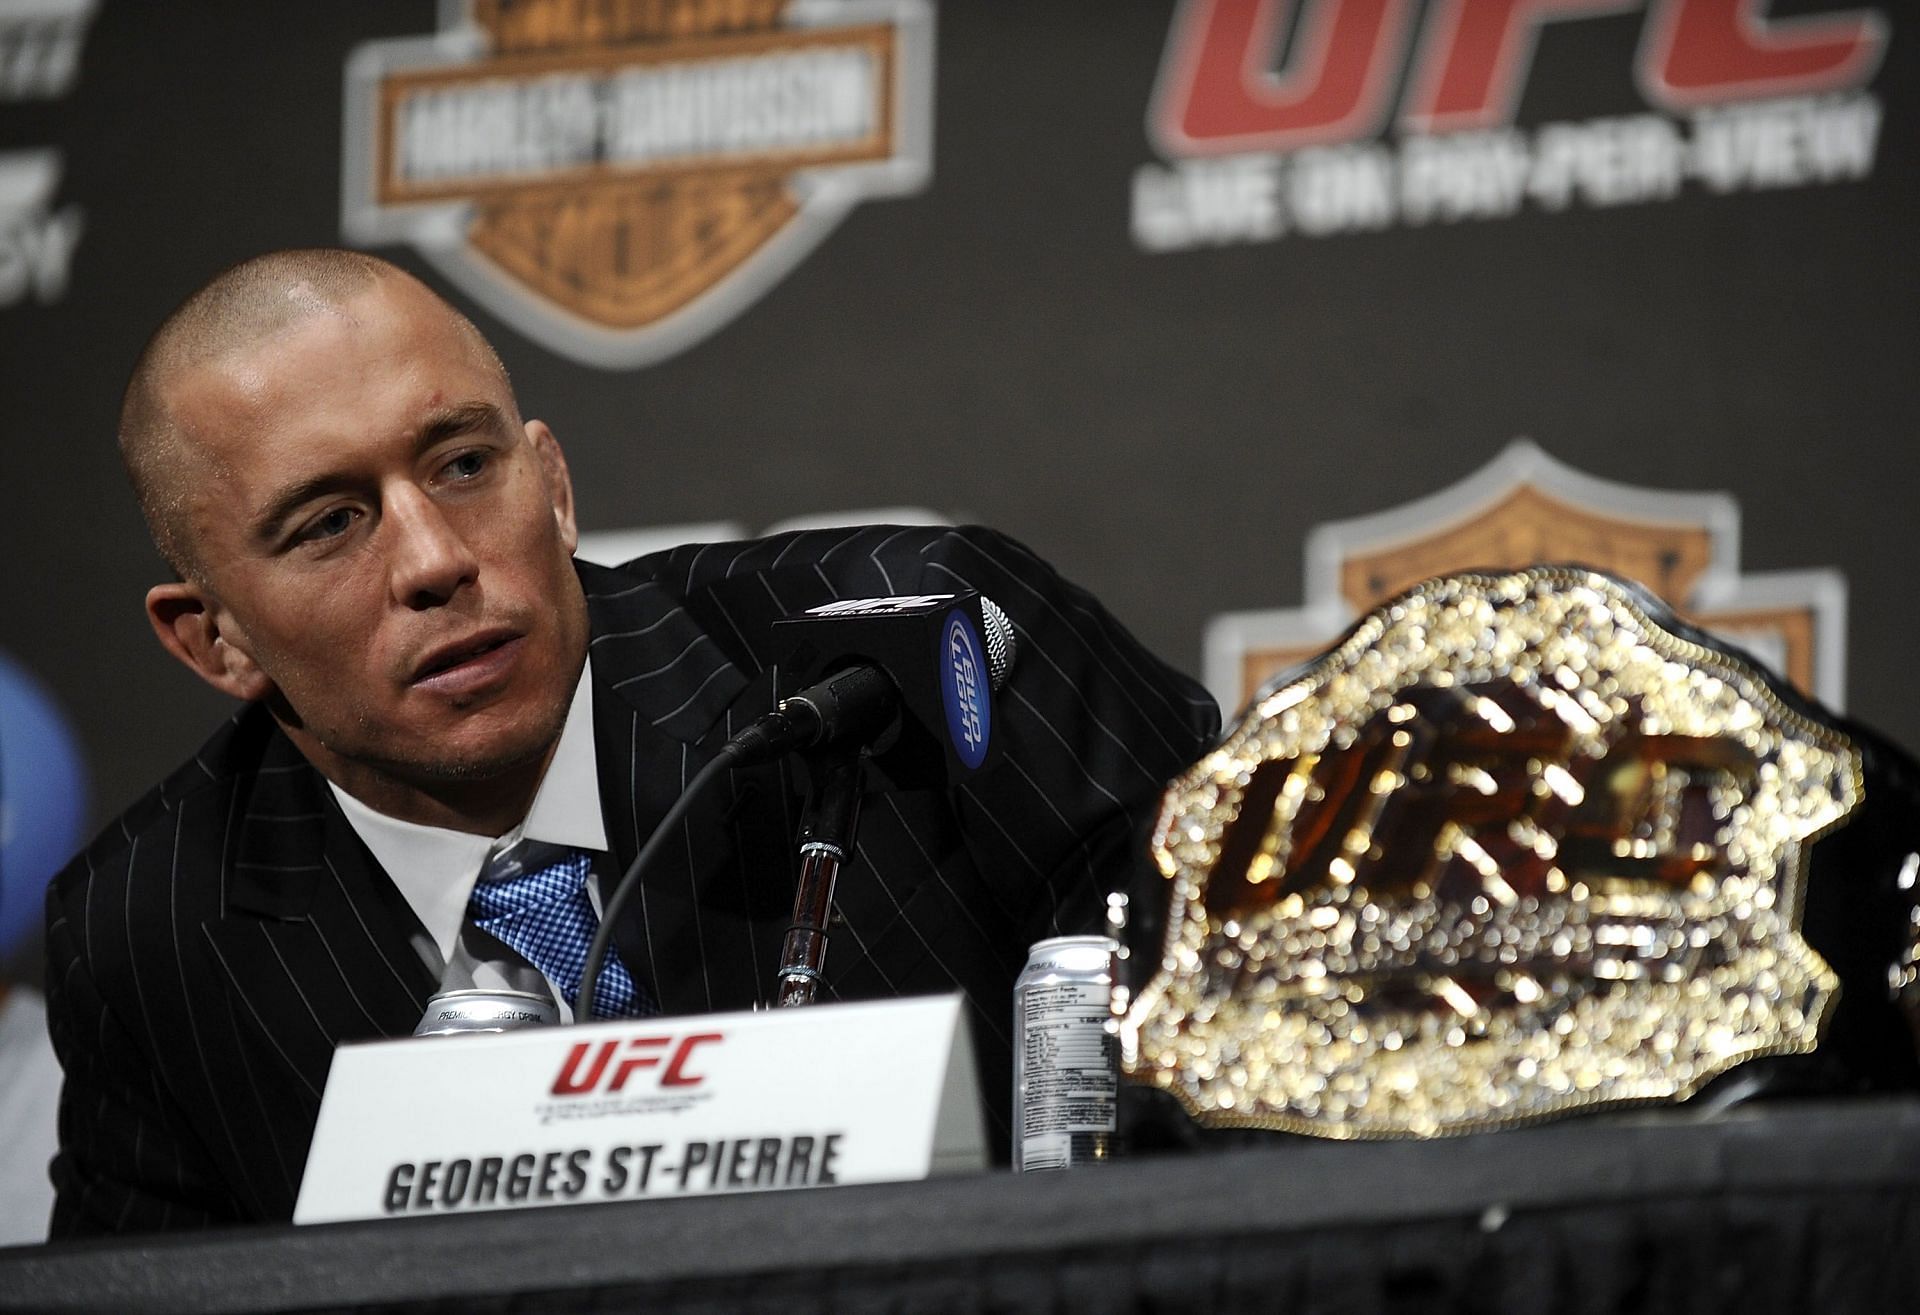 Welterweight champion Georges St-Pierre during a press conference